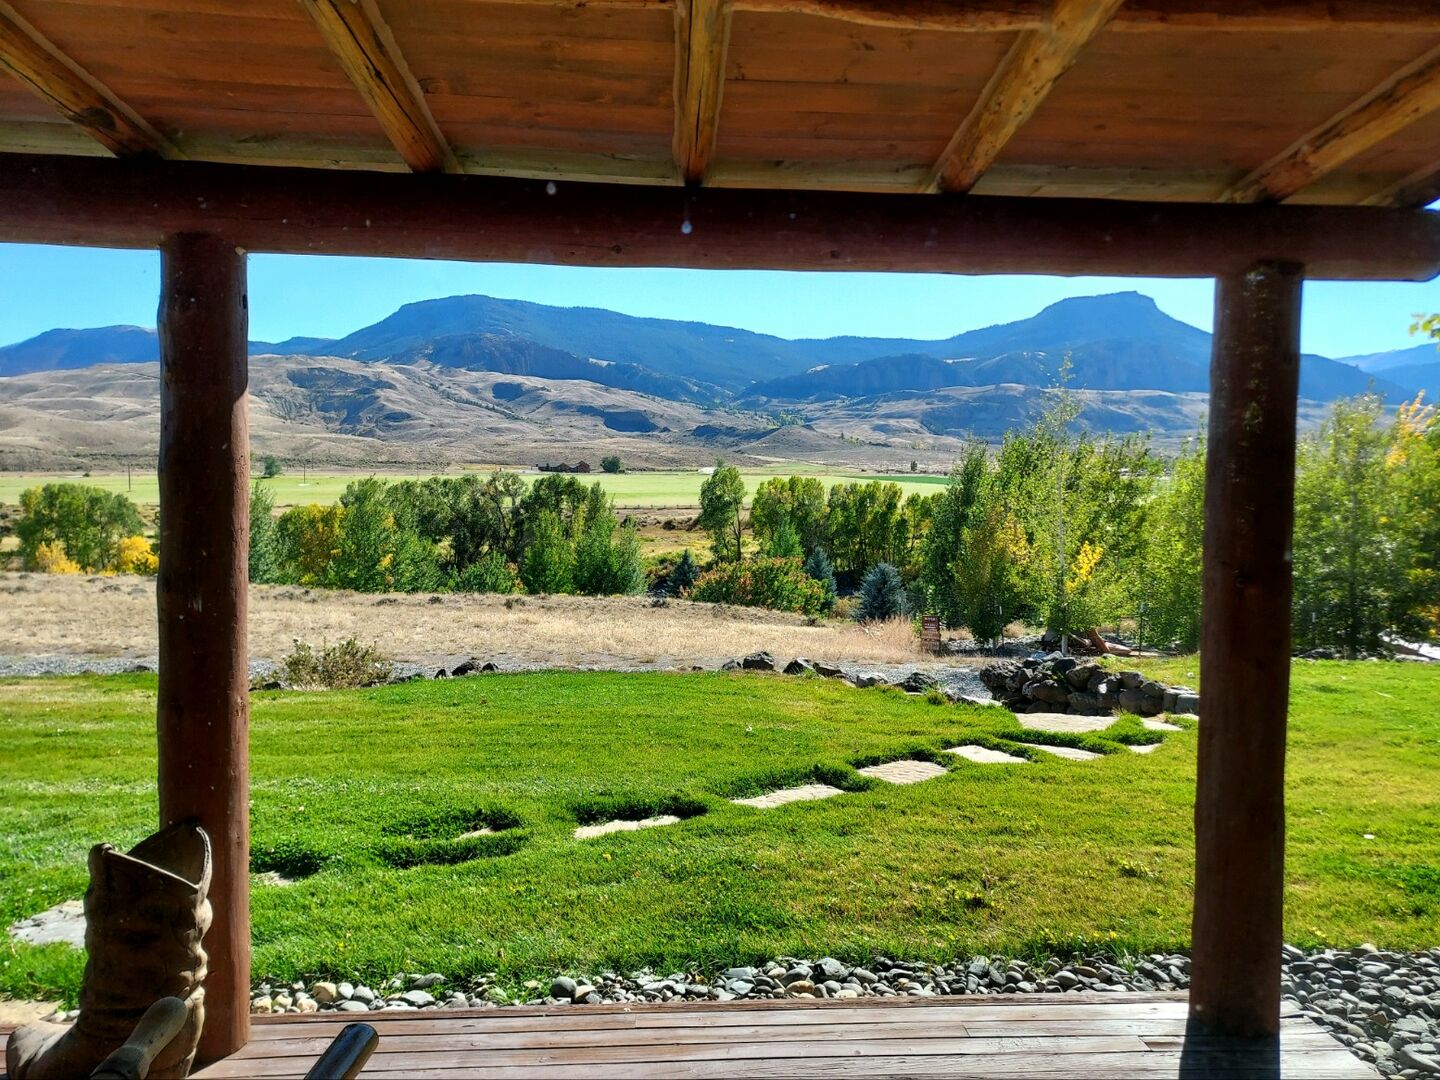 View From the Porch, The Bunkhouse on the left and the owners home on the right